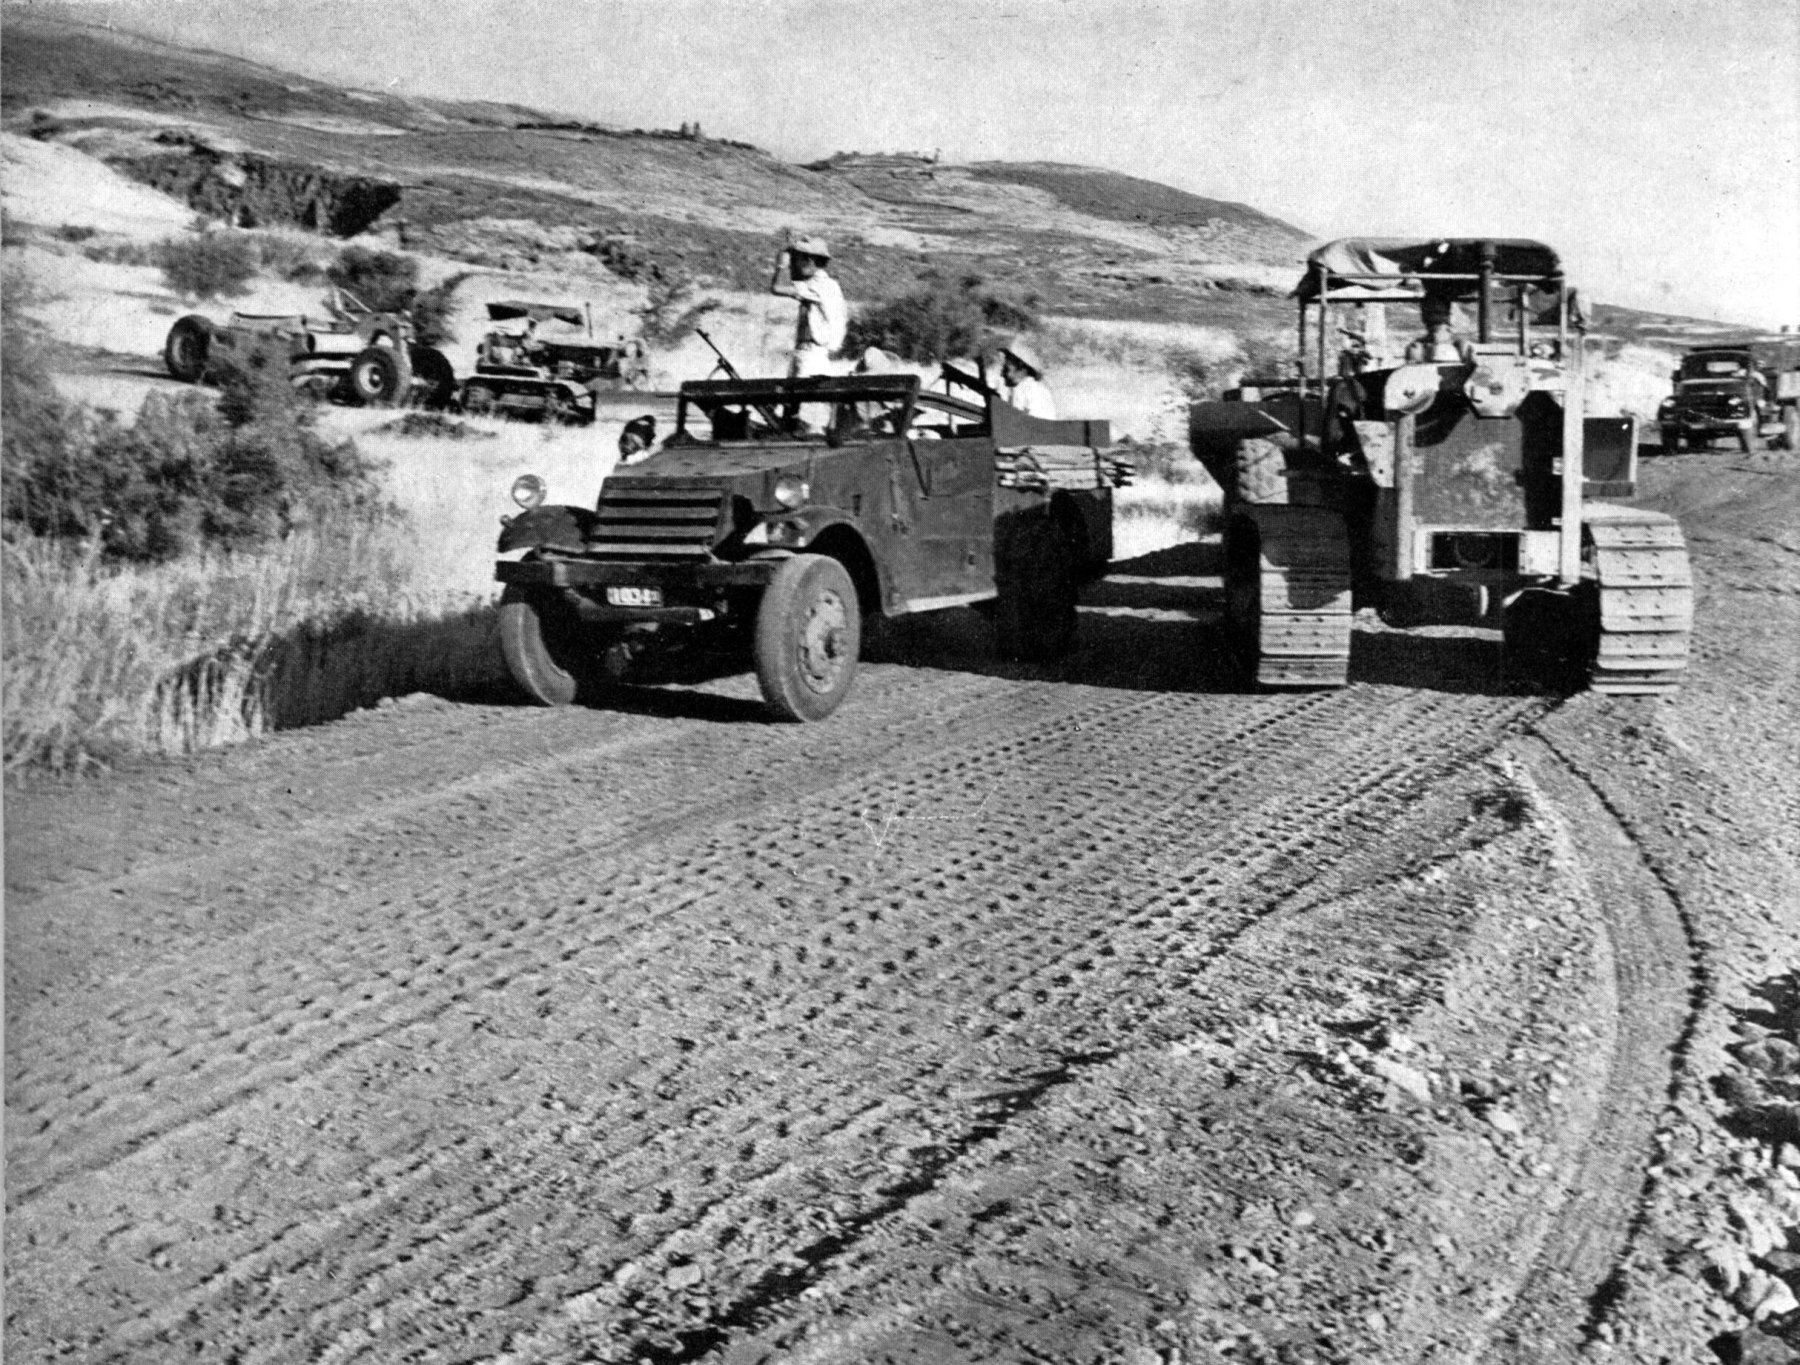 Construction of a road along the Syrian border in eastern Hula valley, Israel, 1957-1958; note US-built M3A1 Scout Car